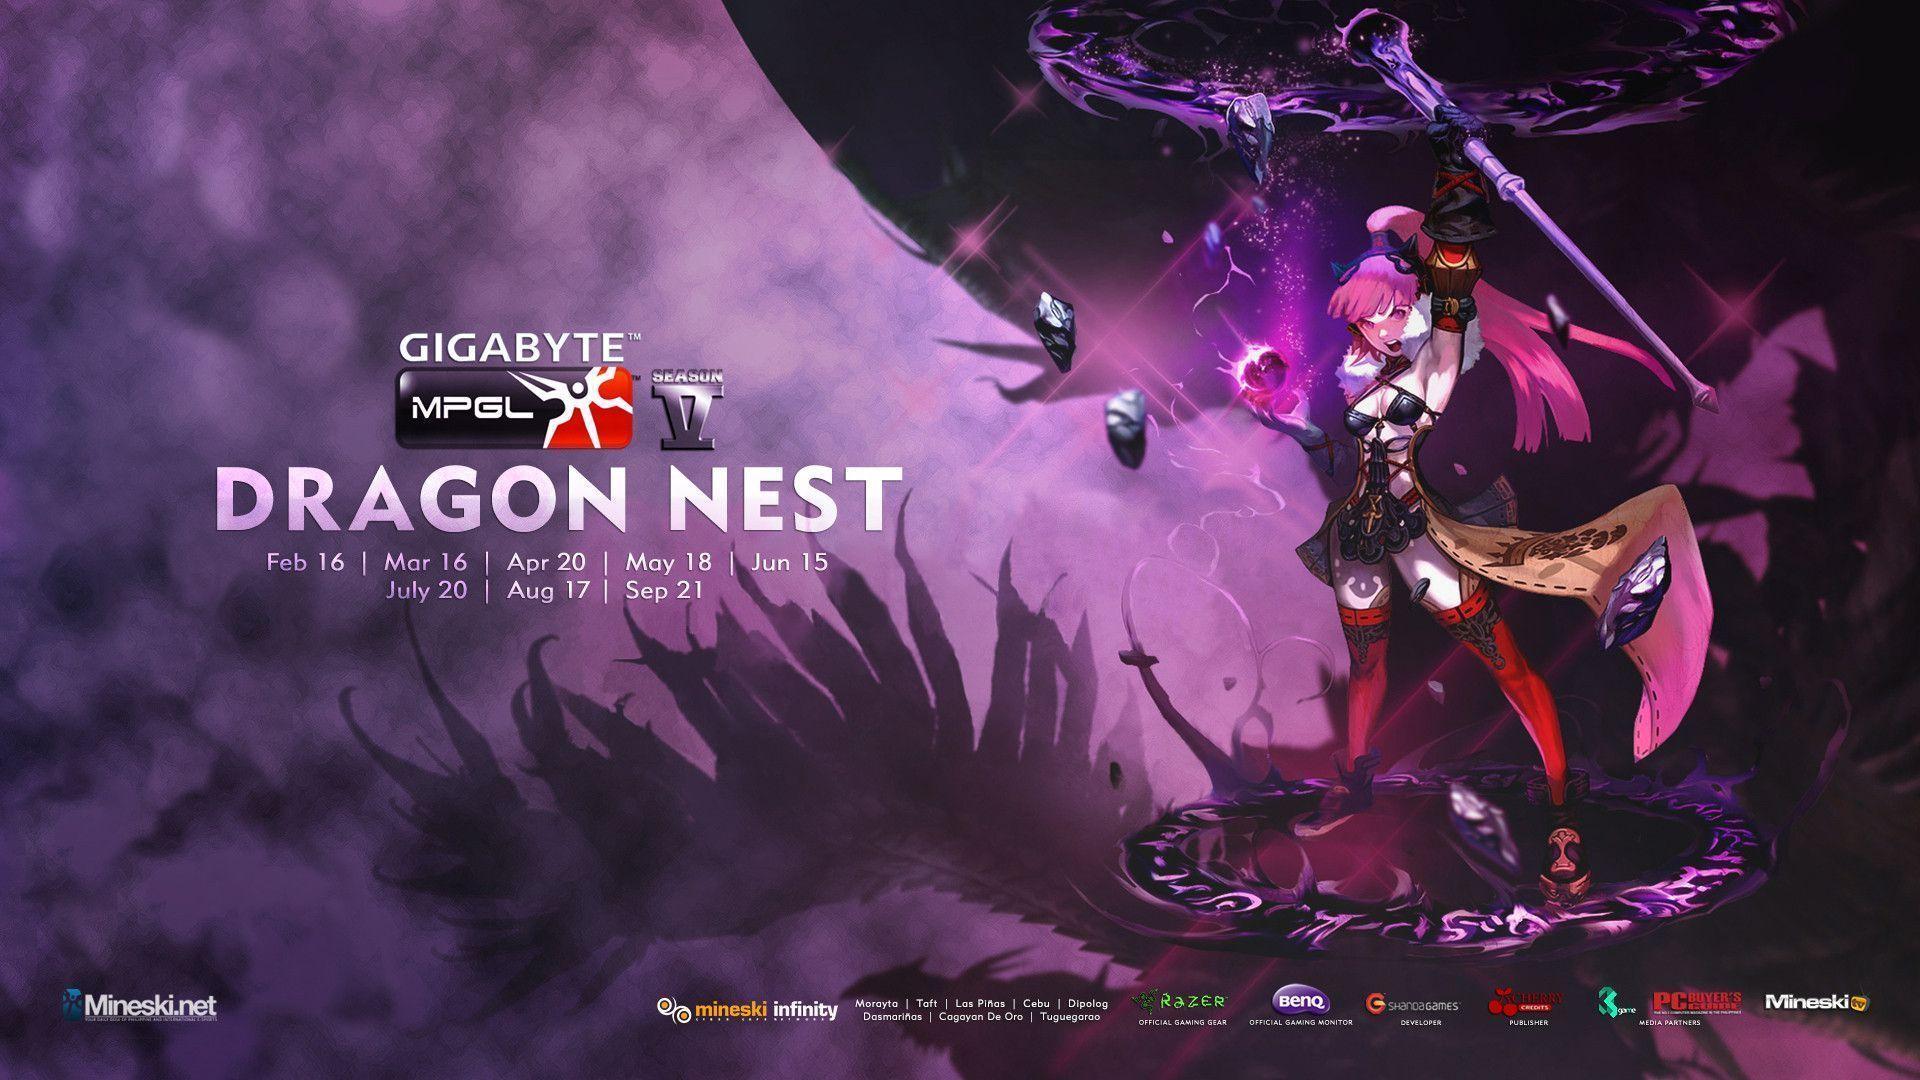 Dragon Nest Awesome Dragon Nest HD Wallpaper Free Download 1920x1080